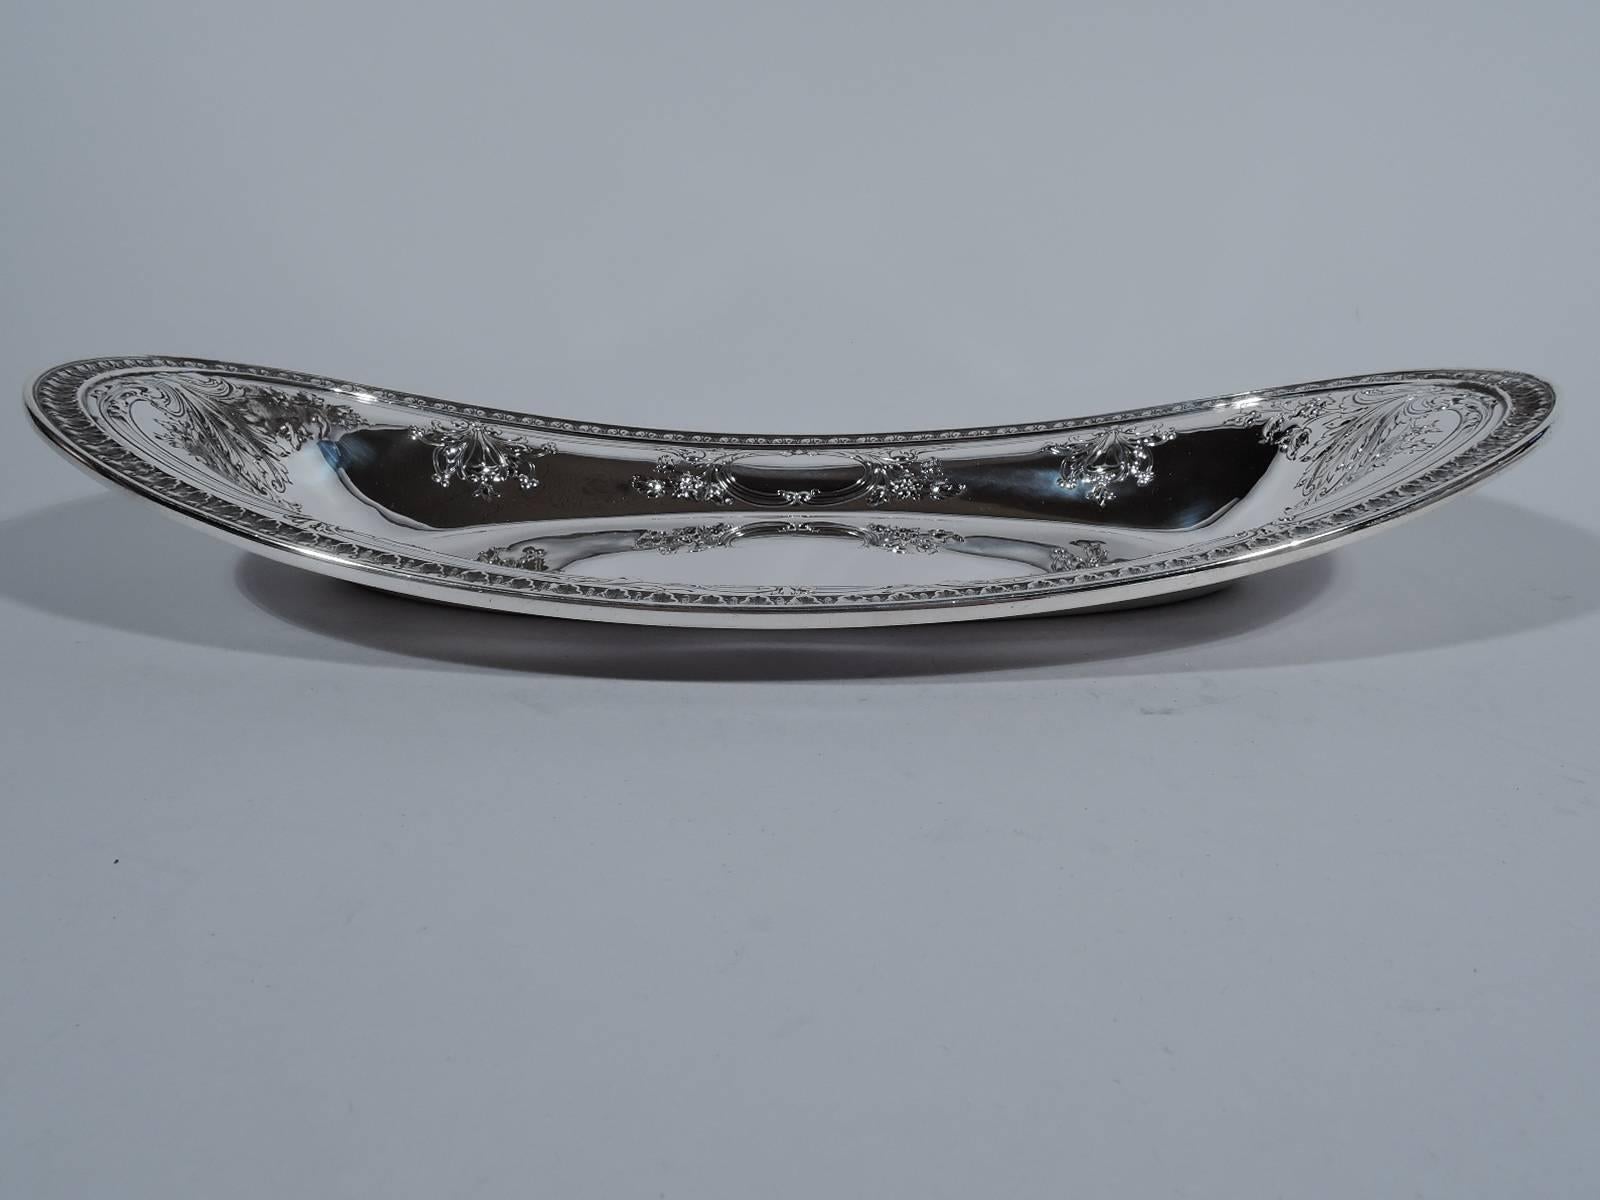 Fancy Edwardian sterling silver bread tray. Made by Gorham in Providence in 1919. Plain oval well, tapering sides, and swooping rim. Chased and repousse foliage and flowers as well as two oval frames (vacant). Leaf-and-dart rim. Hallmark includes